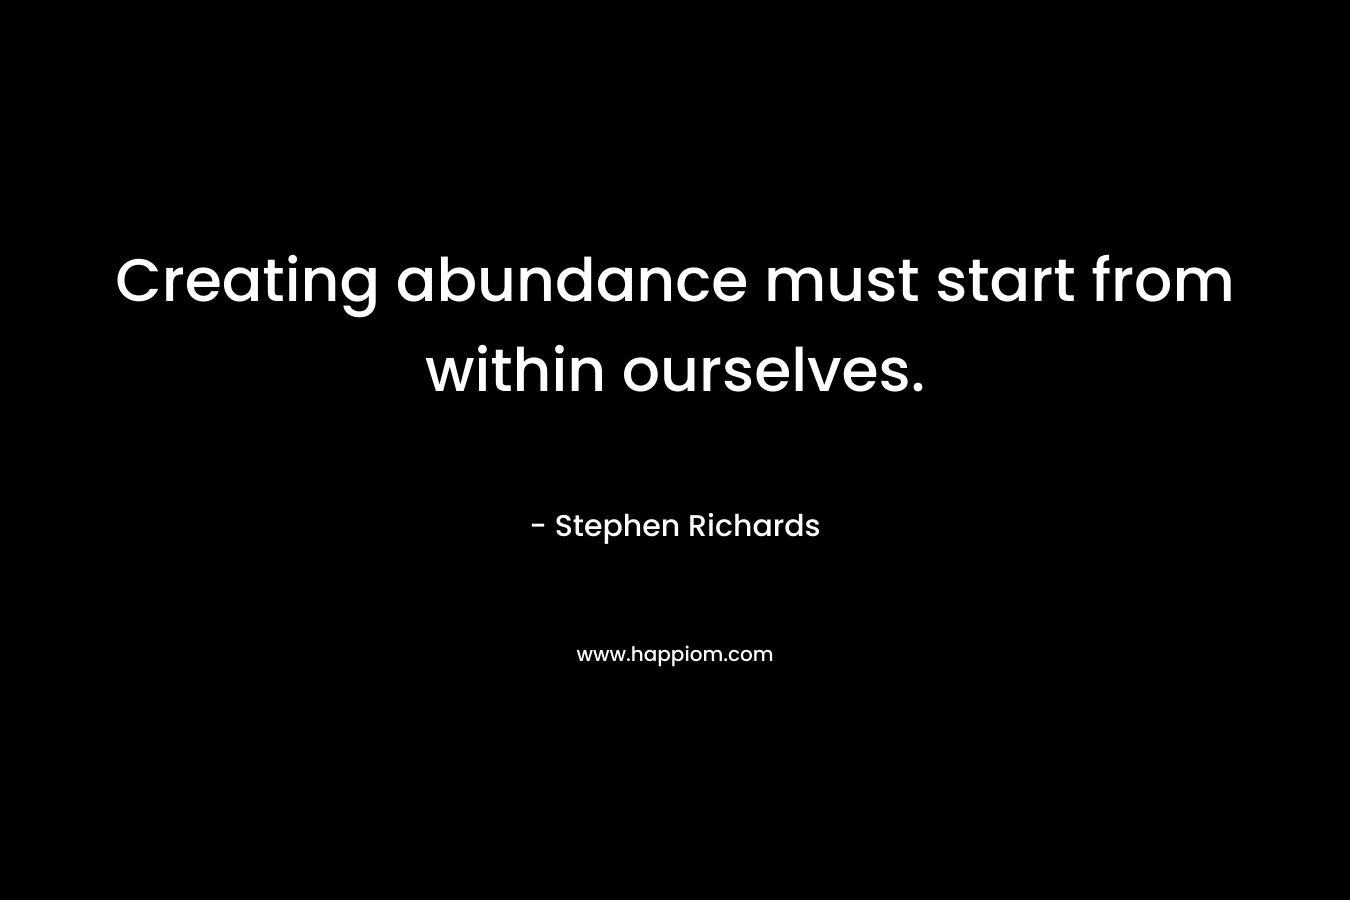 Creating abundance must start from within ourselves.